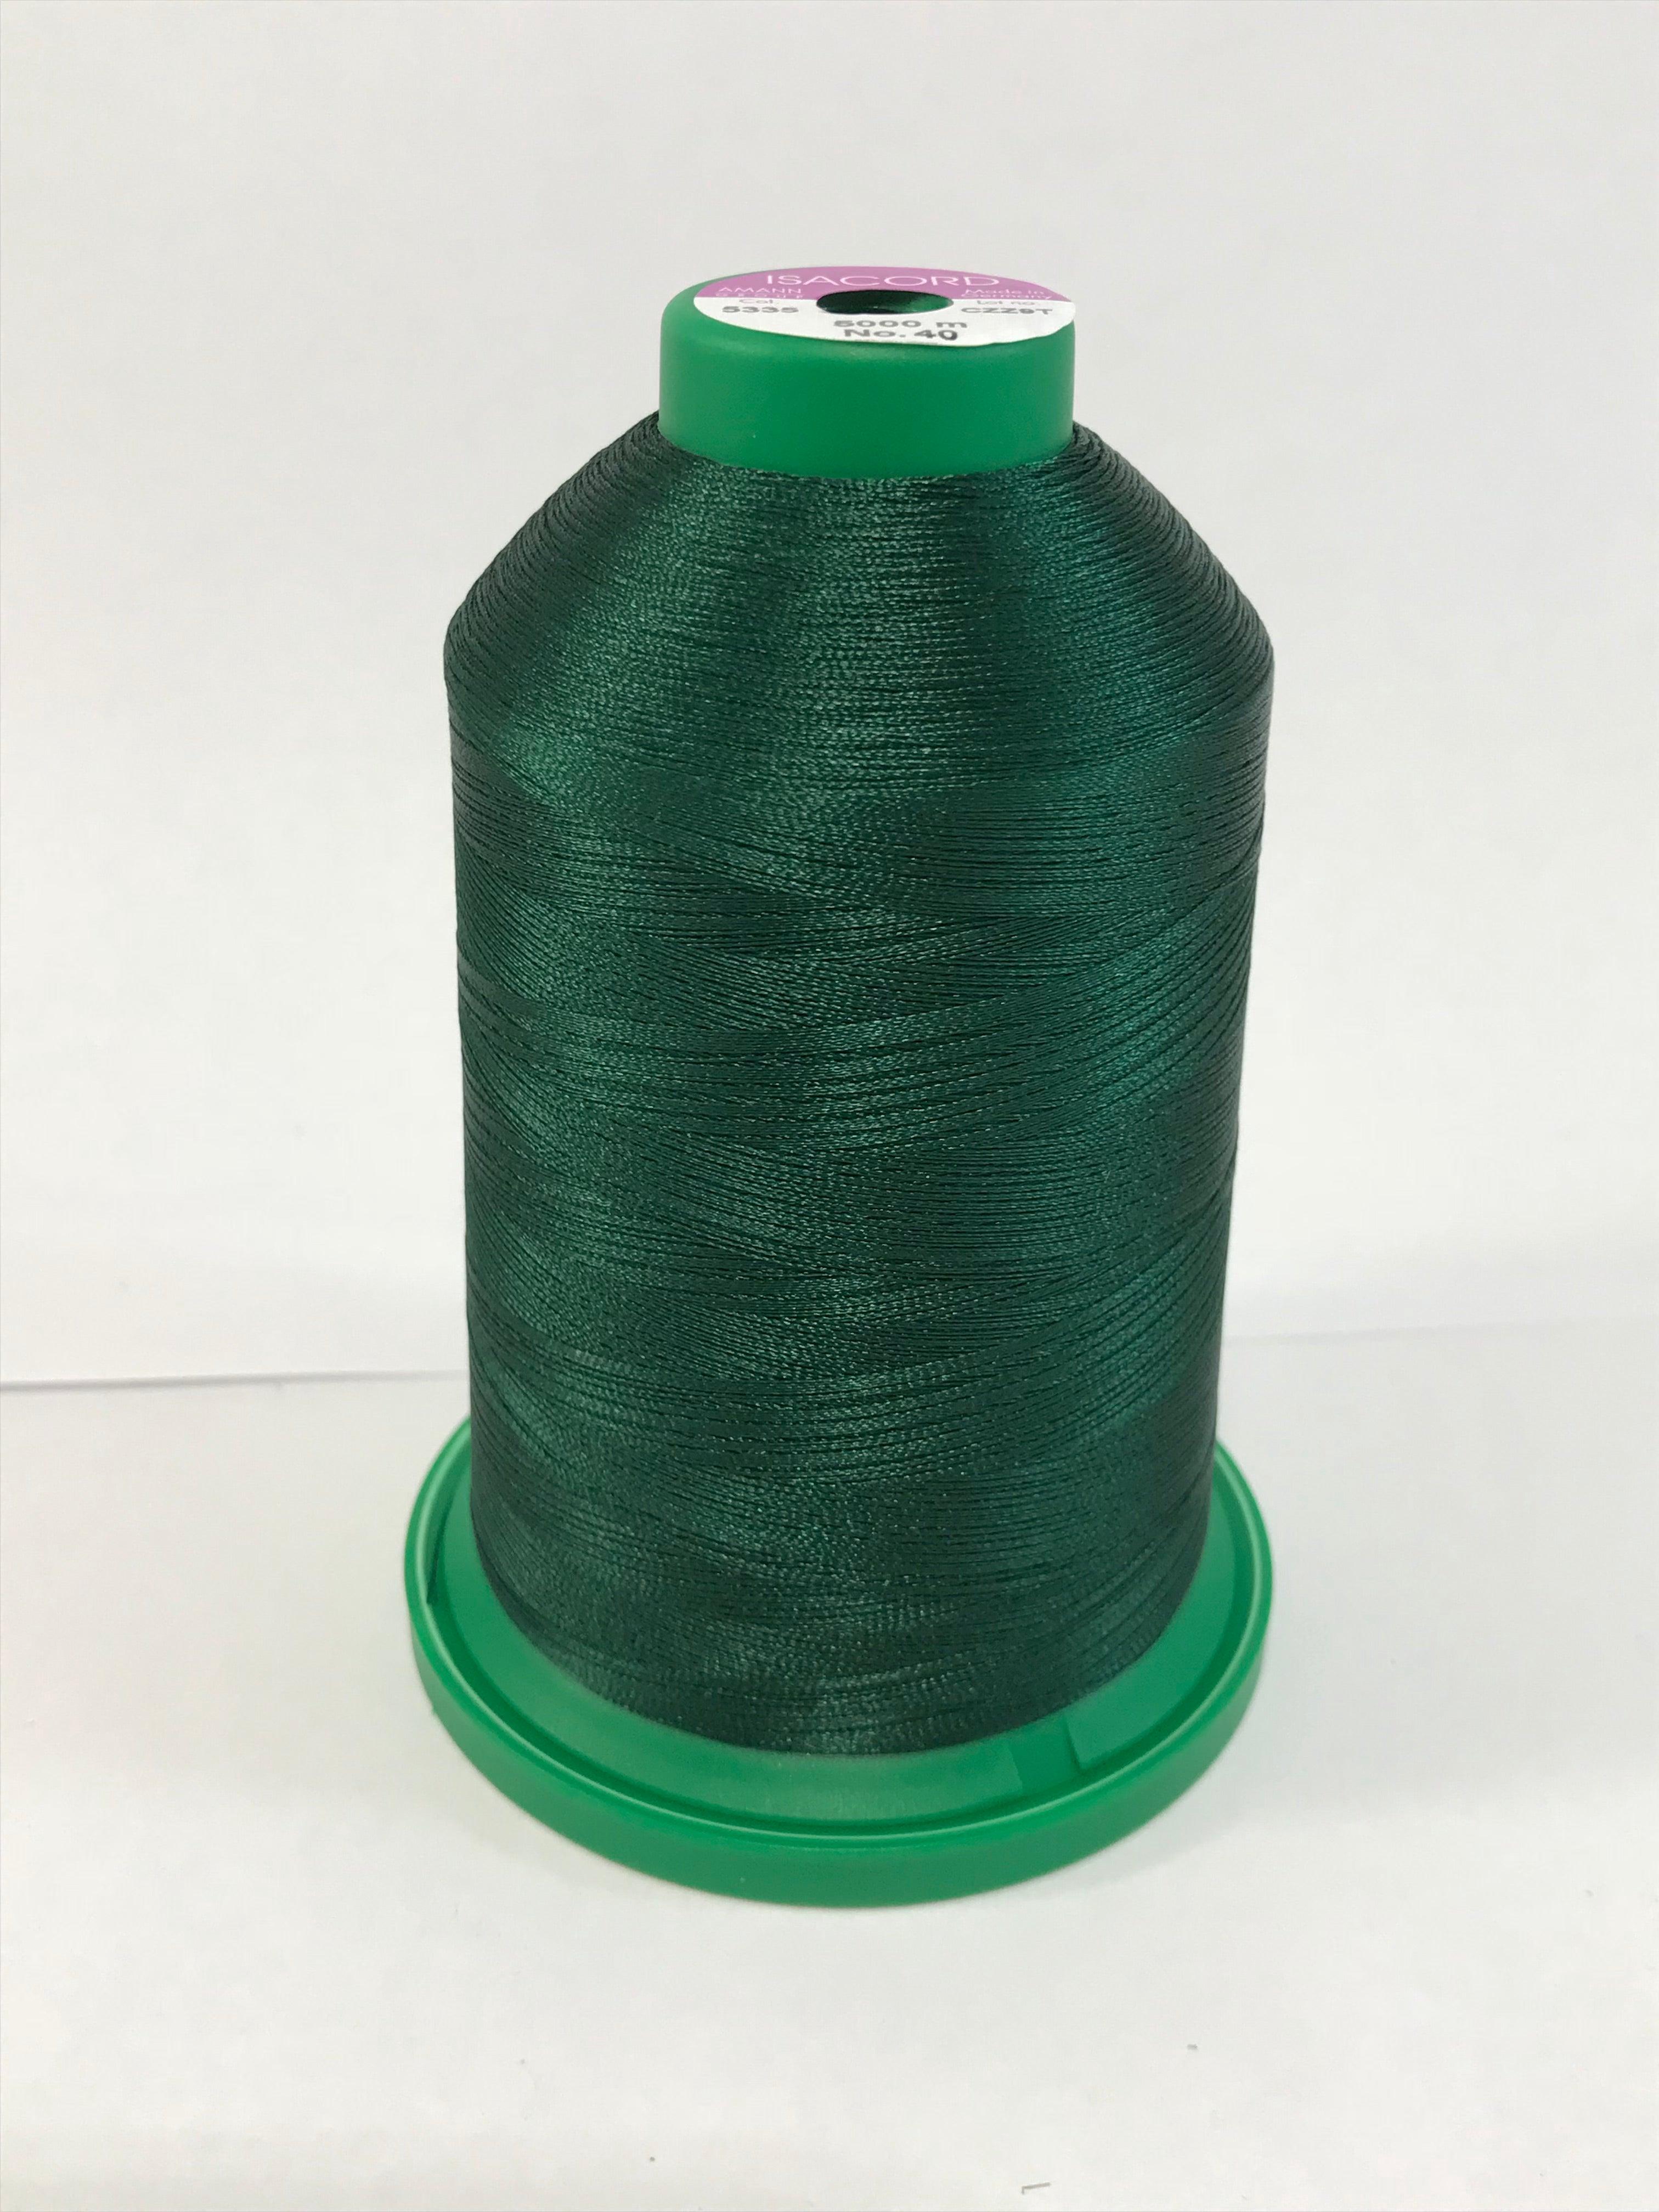 5335 - SWAMP - ISACORD EMBROIDERY THREAD 40 WT